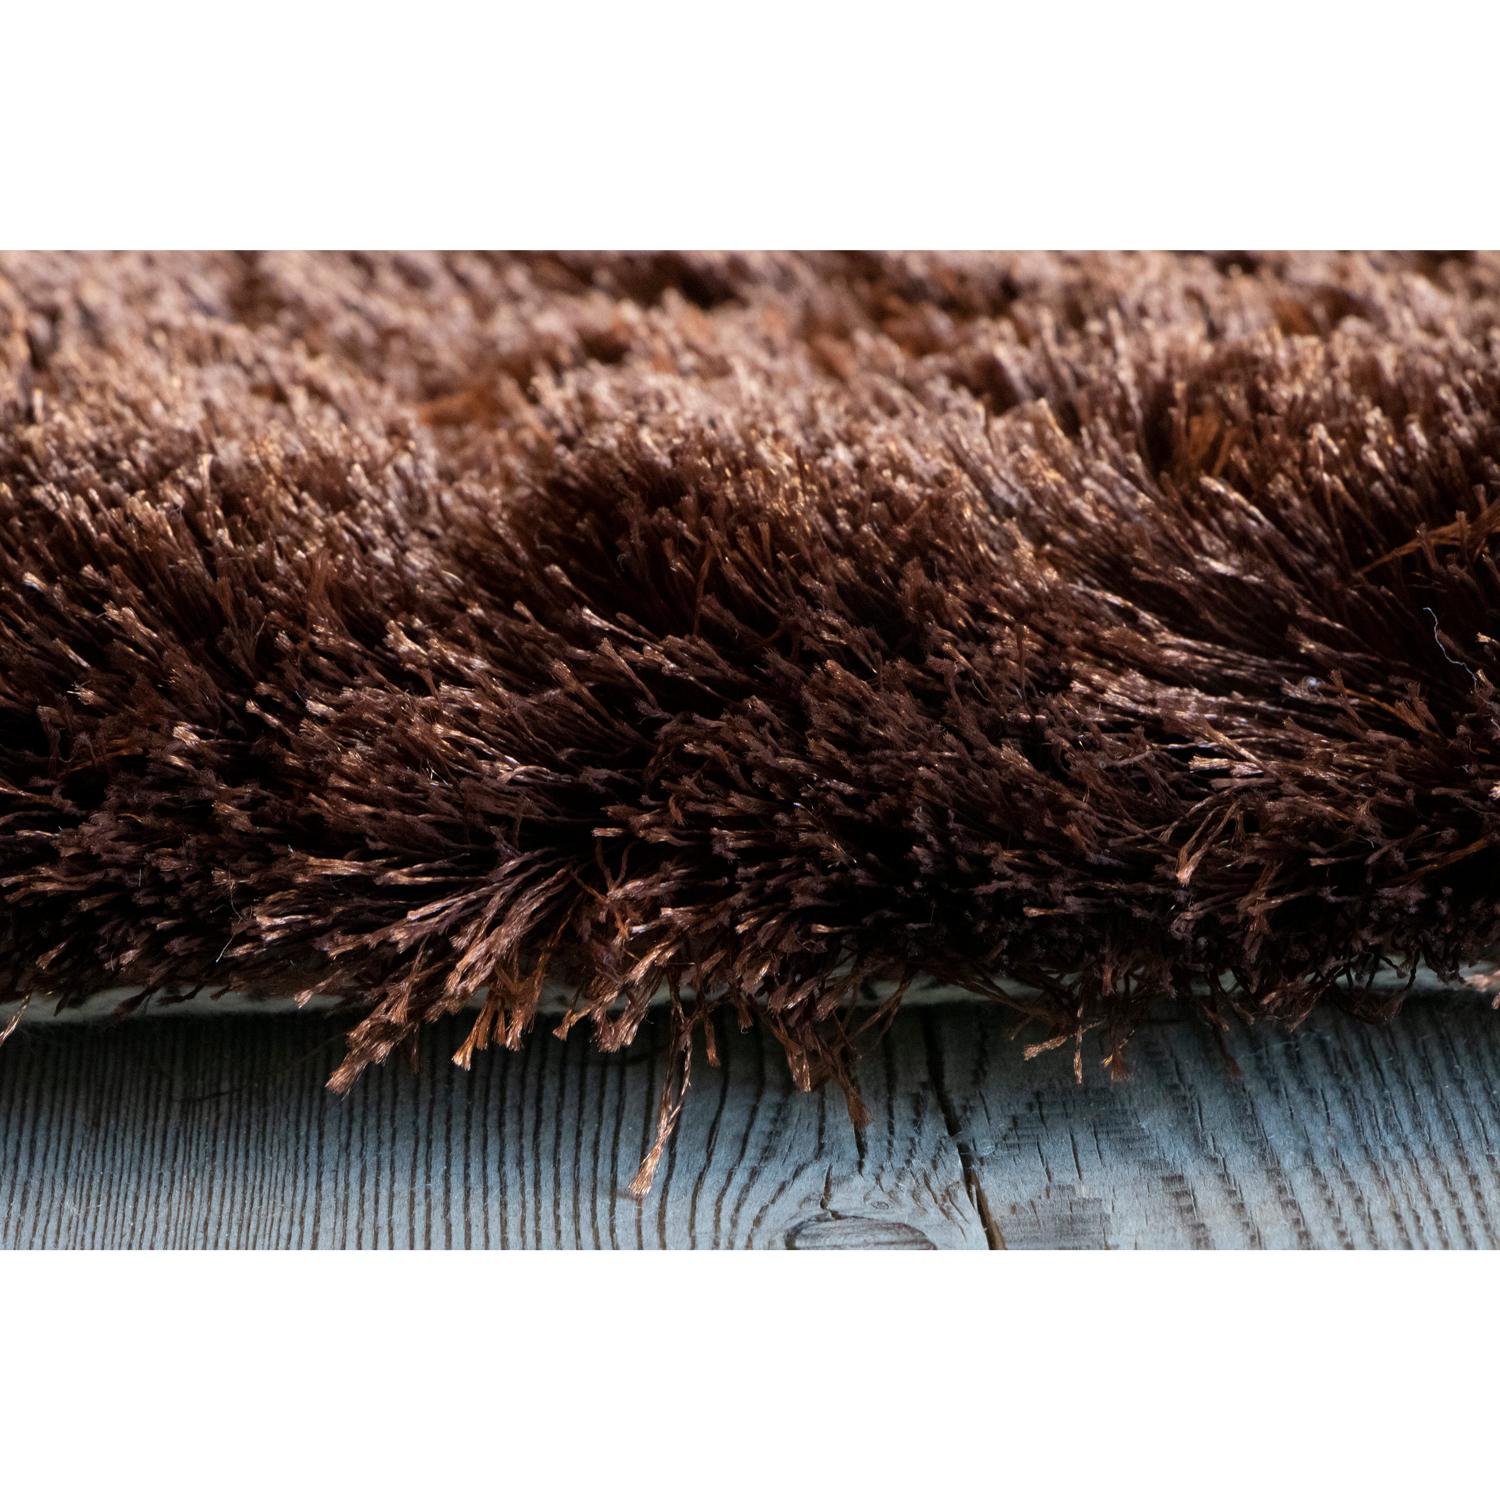 Other Contemporary Soft Cozy Design Brown Rug by Deanna Comellini In Stock 200x300 cm For Sale